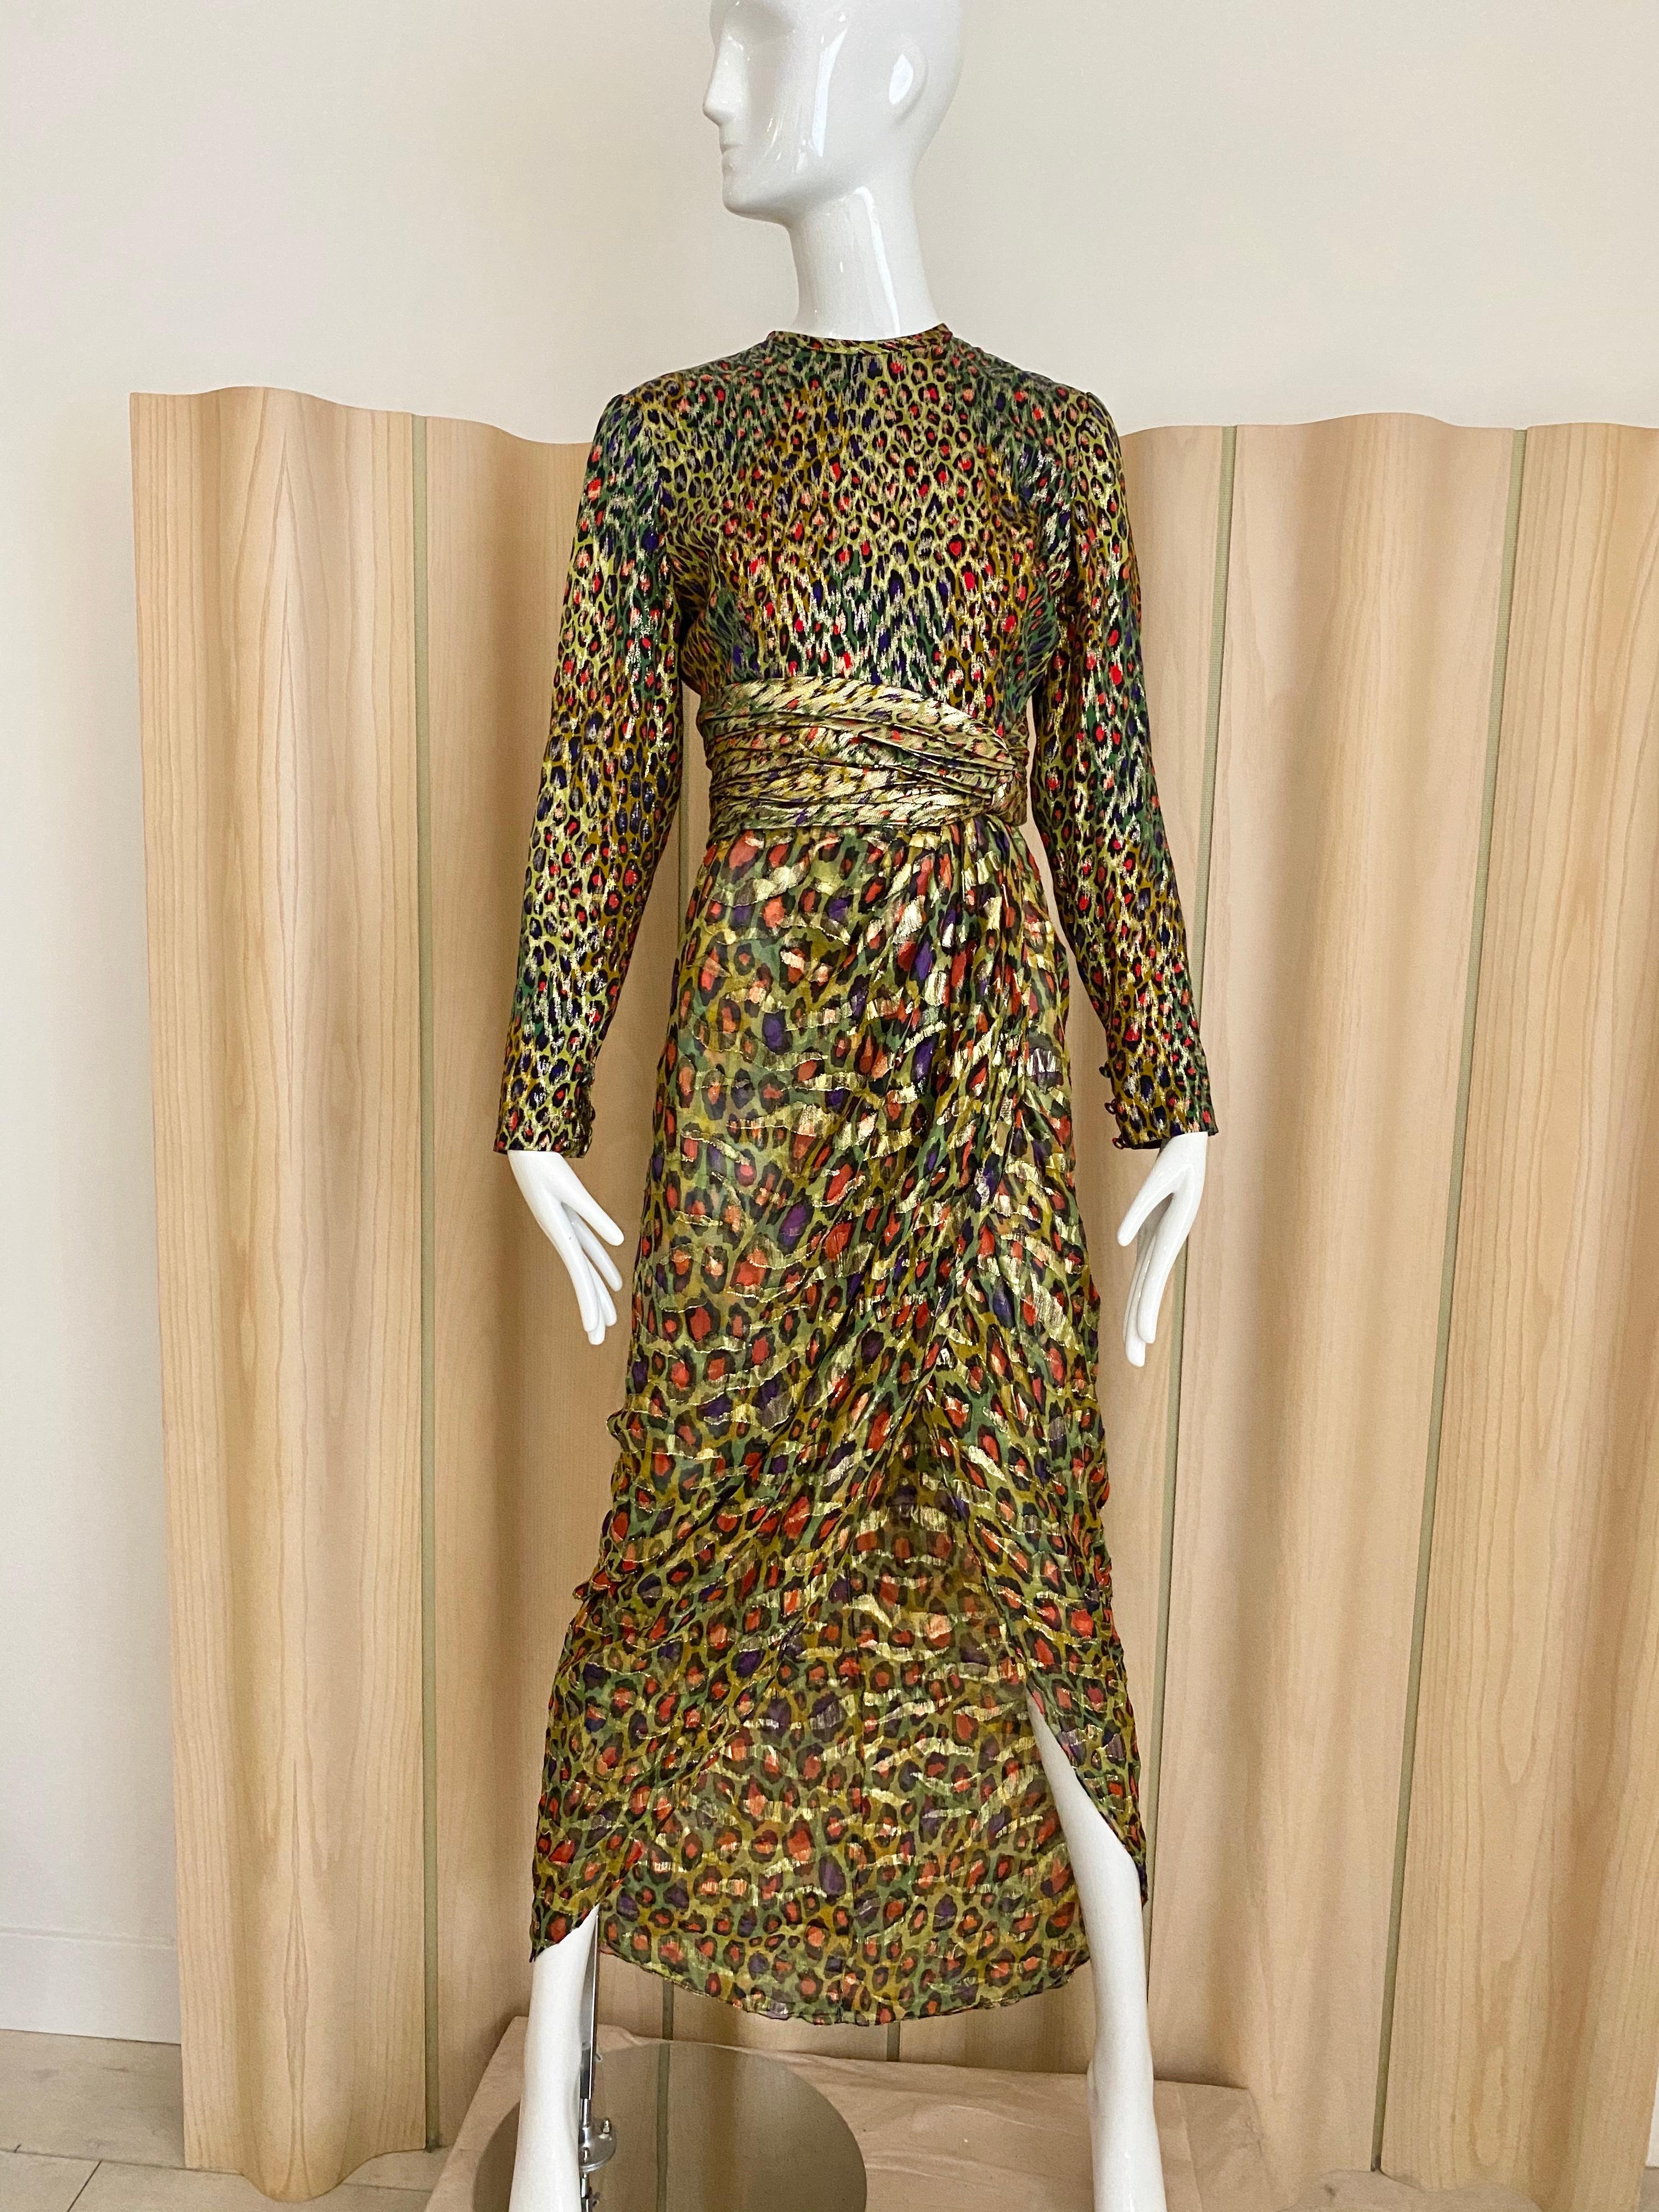 Bill Blass 1989 silk lame metallic leopard print in green, red and gold  long sleeve dress with slit. 
Bust; 36” / W: 28’